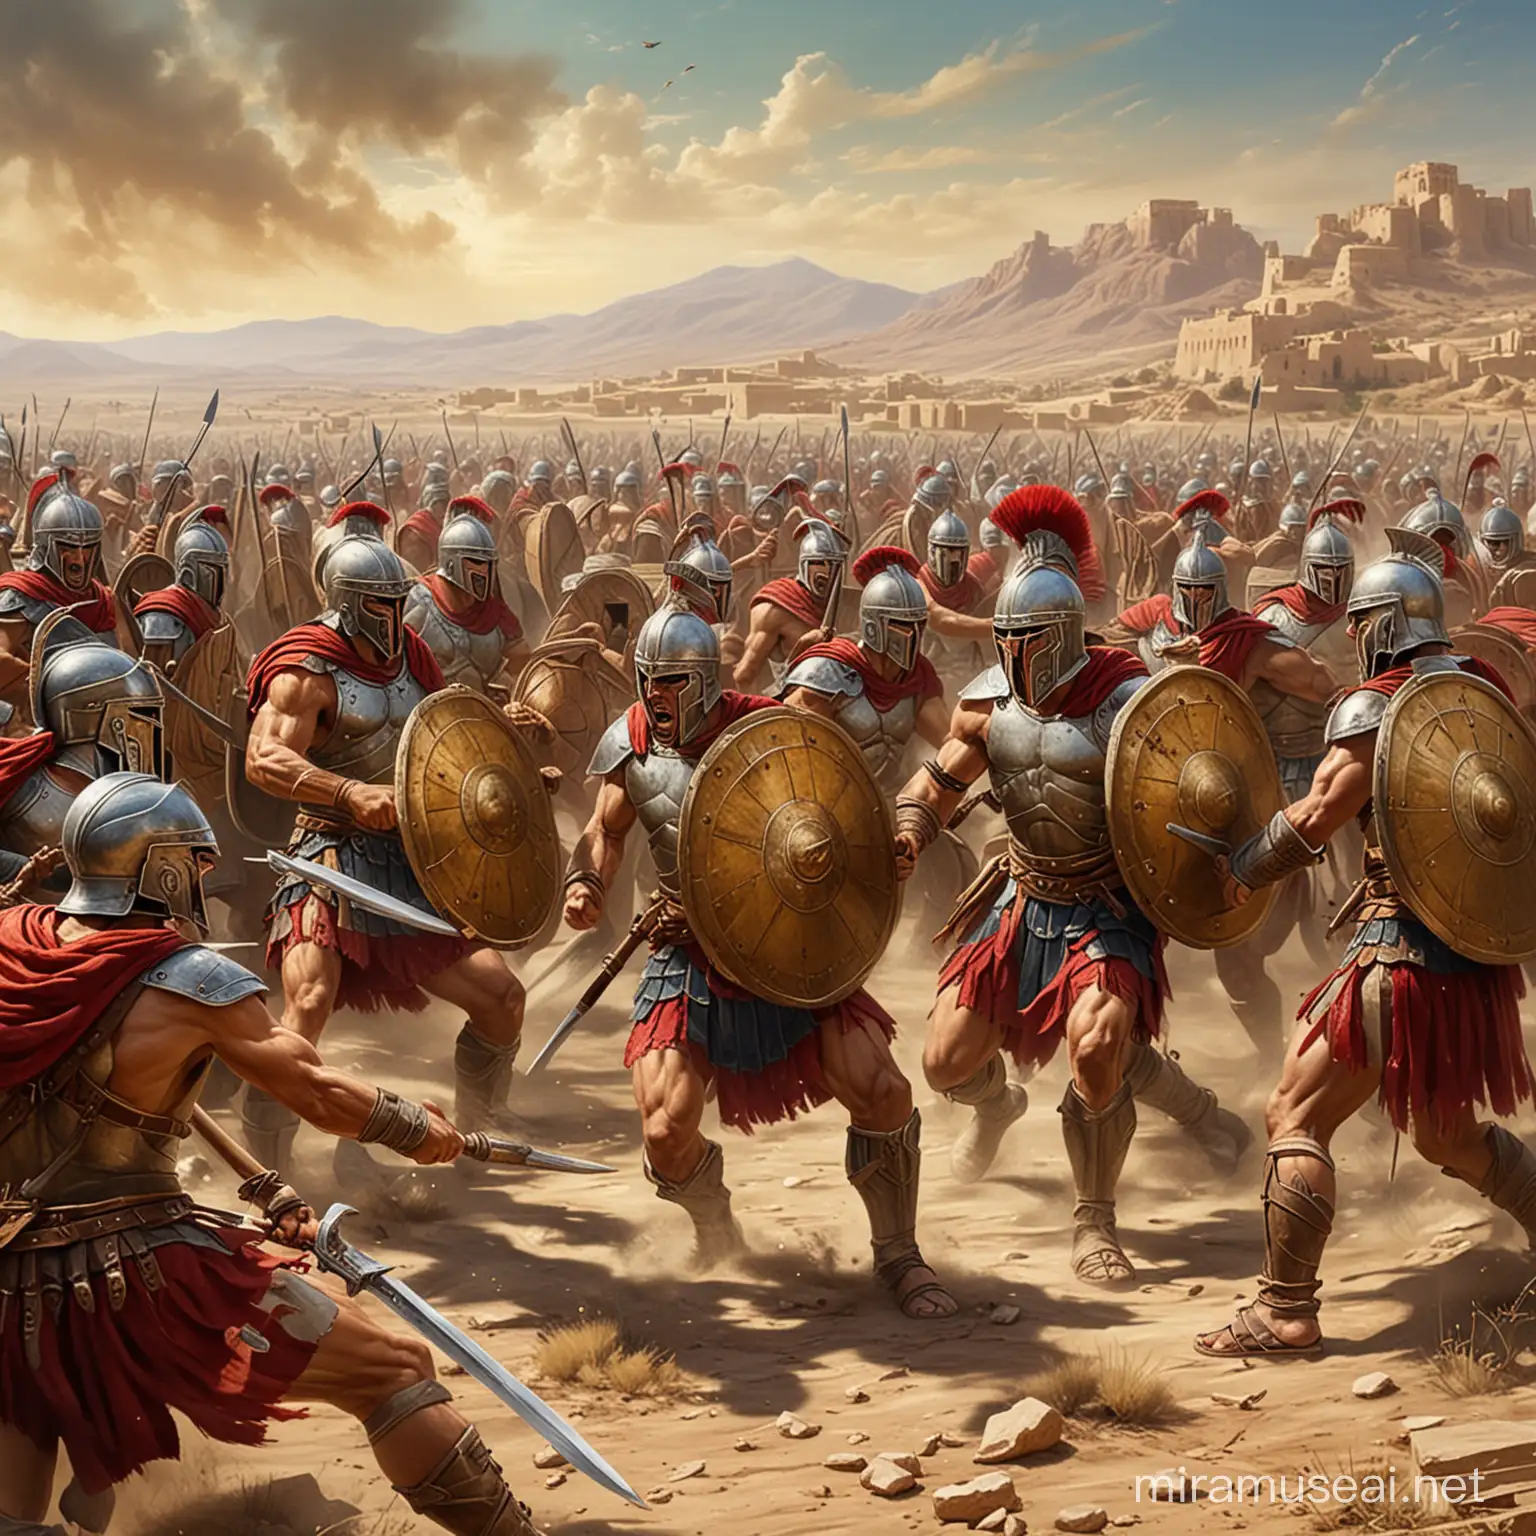 Brave Spartans Engage in Fierce Battle Against Persians